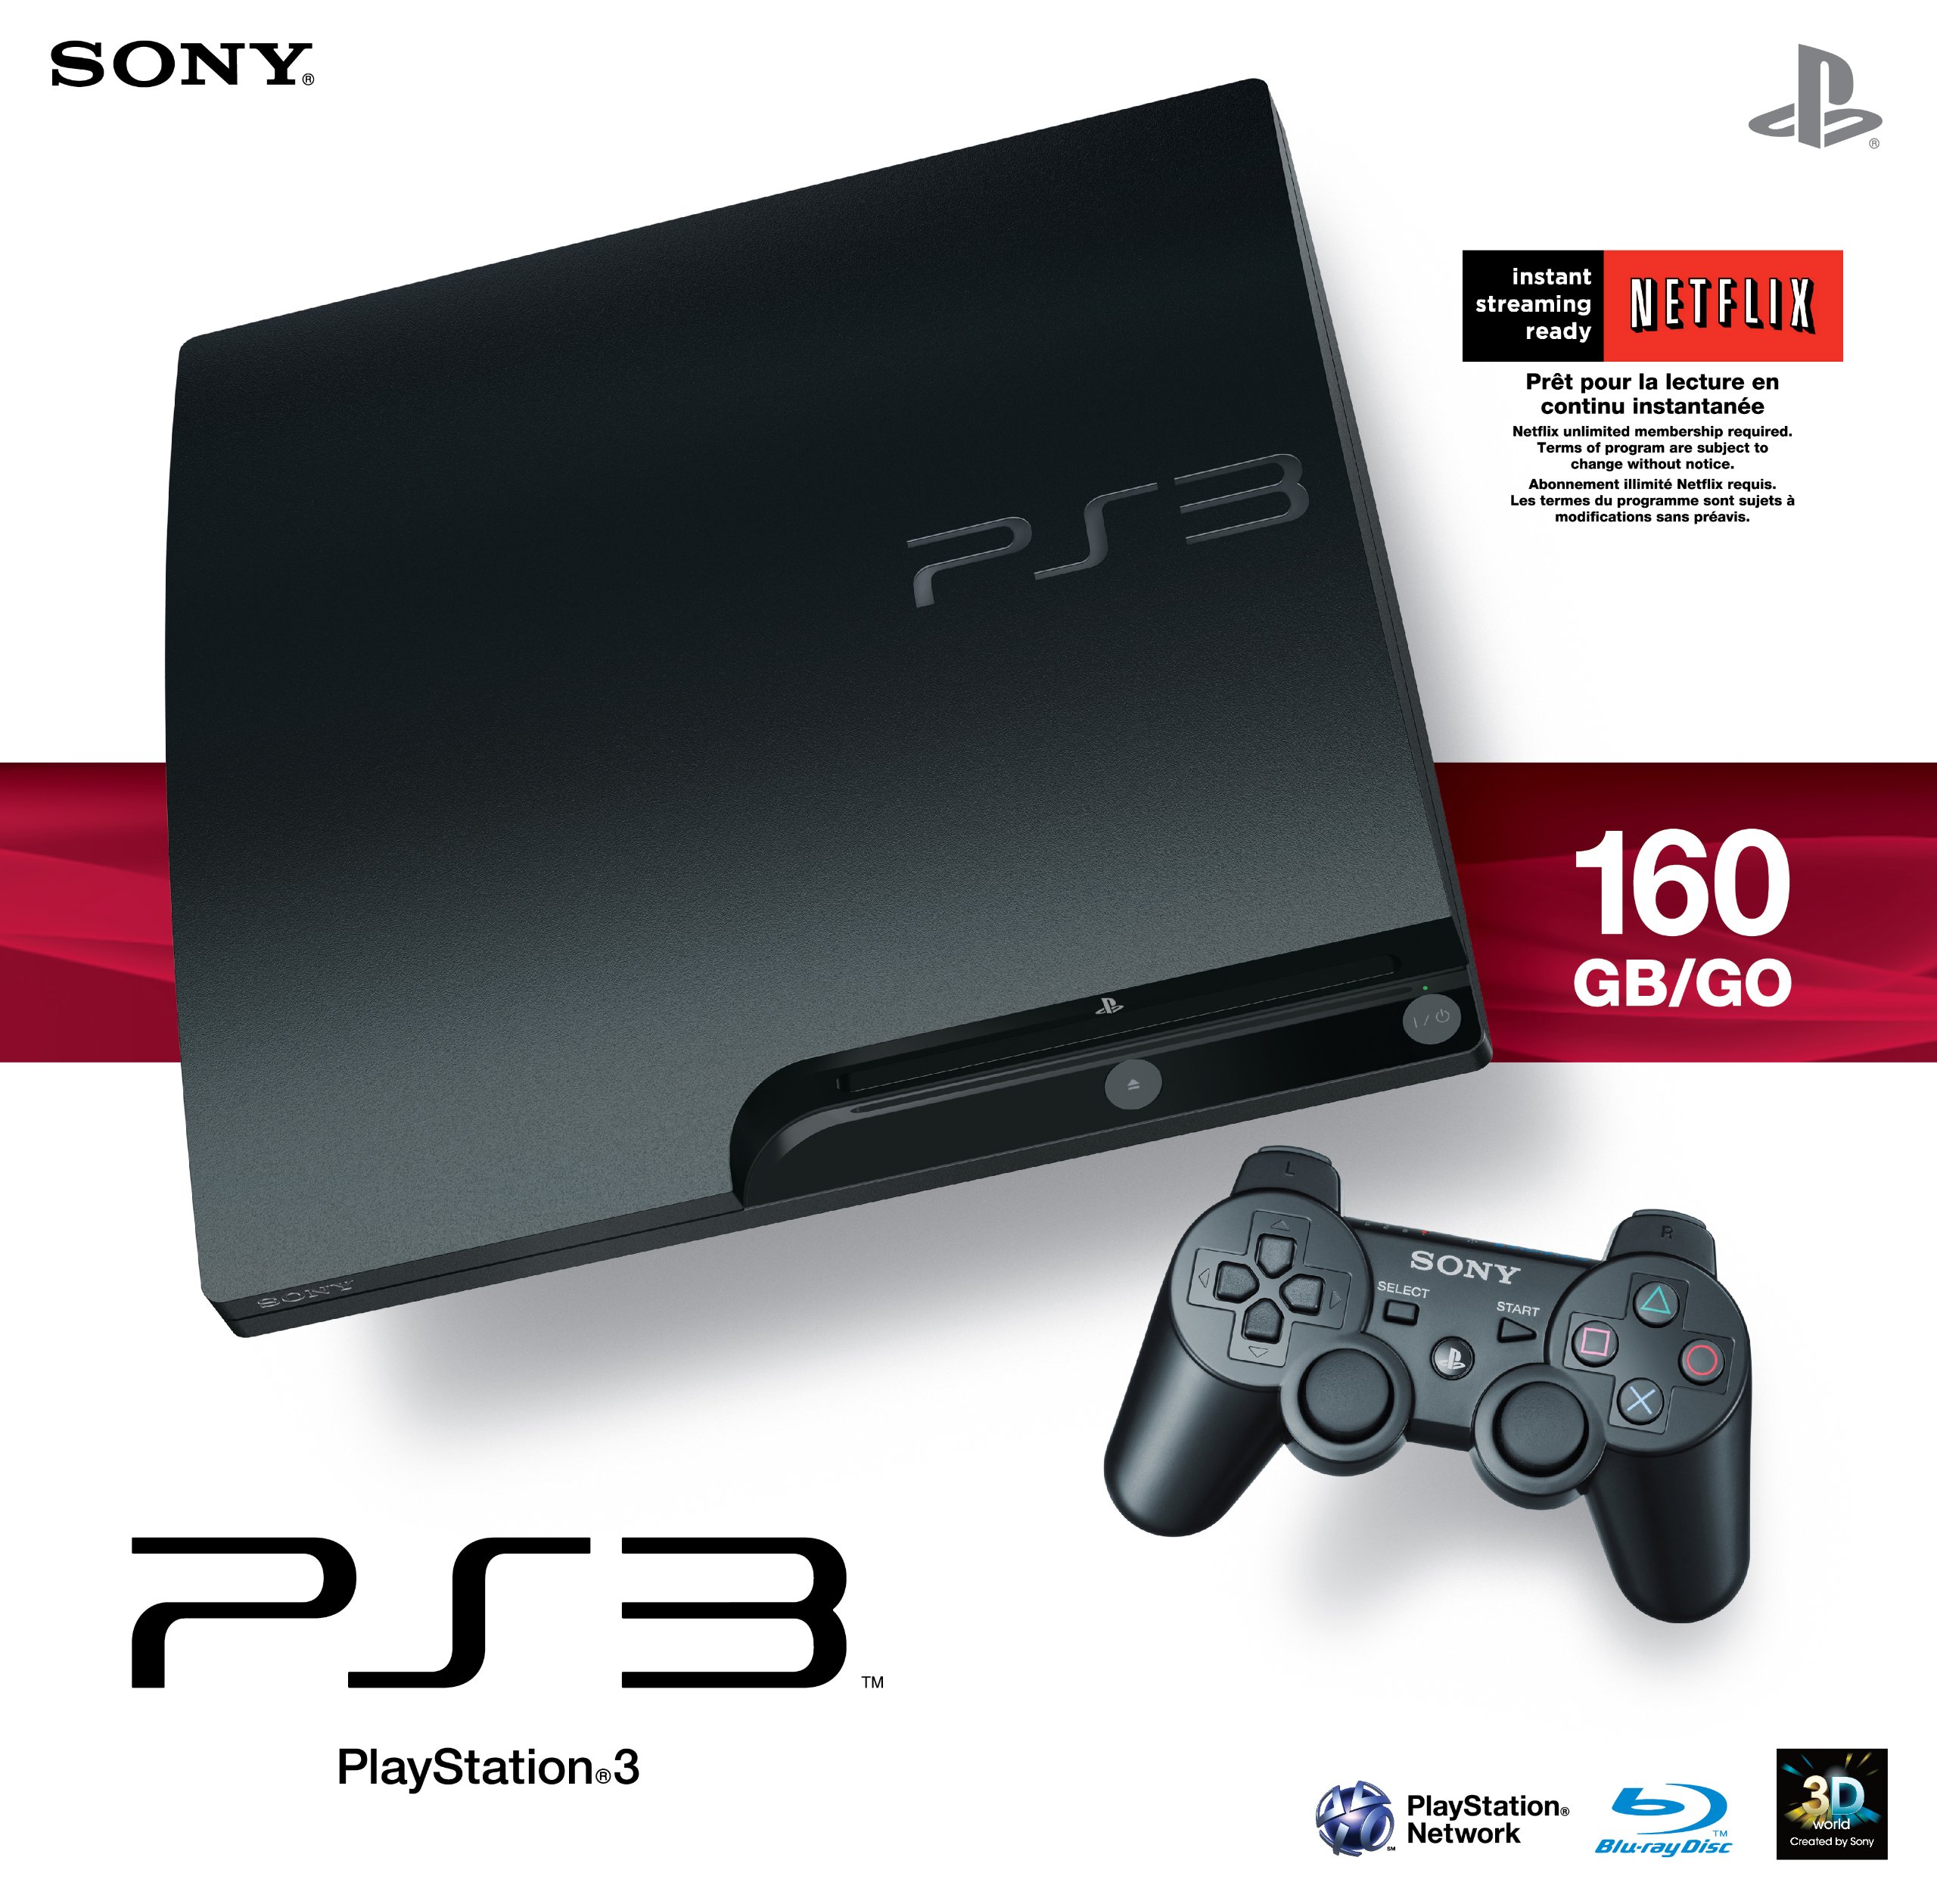 Sony Playstation 3 160GB System (Used/Pre-Owned) - image 1 of 2